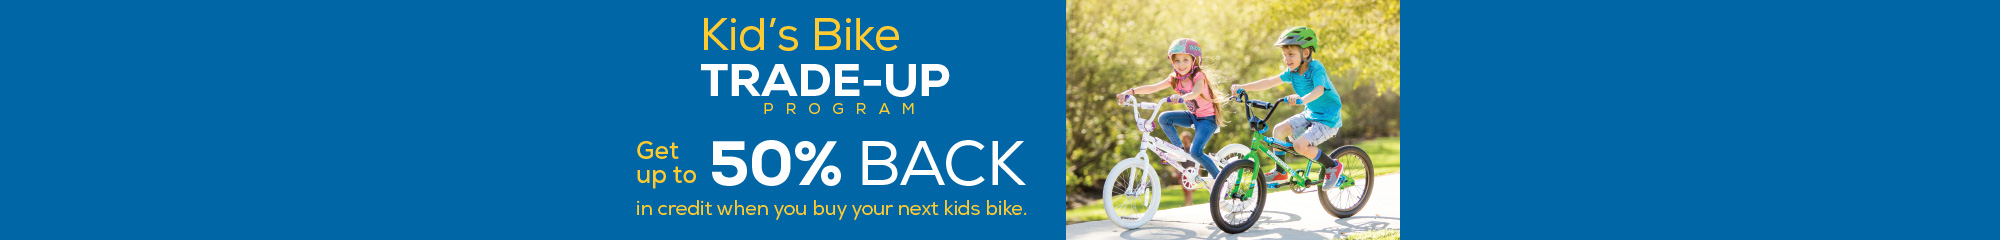 Kids Bike Trade-Up. Get up to 50% credit on your next kid's bike.  